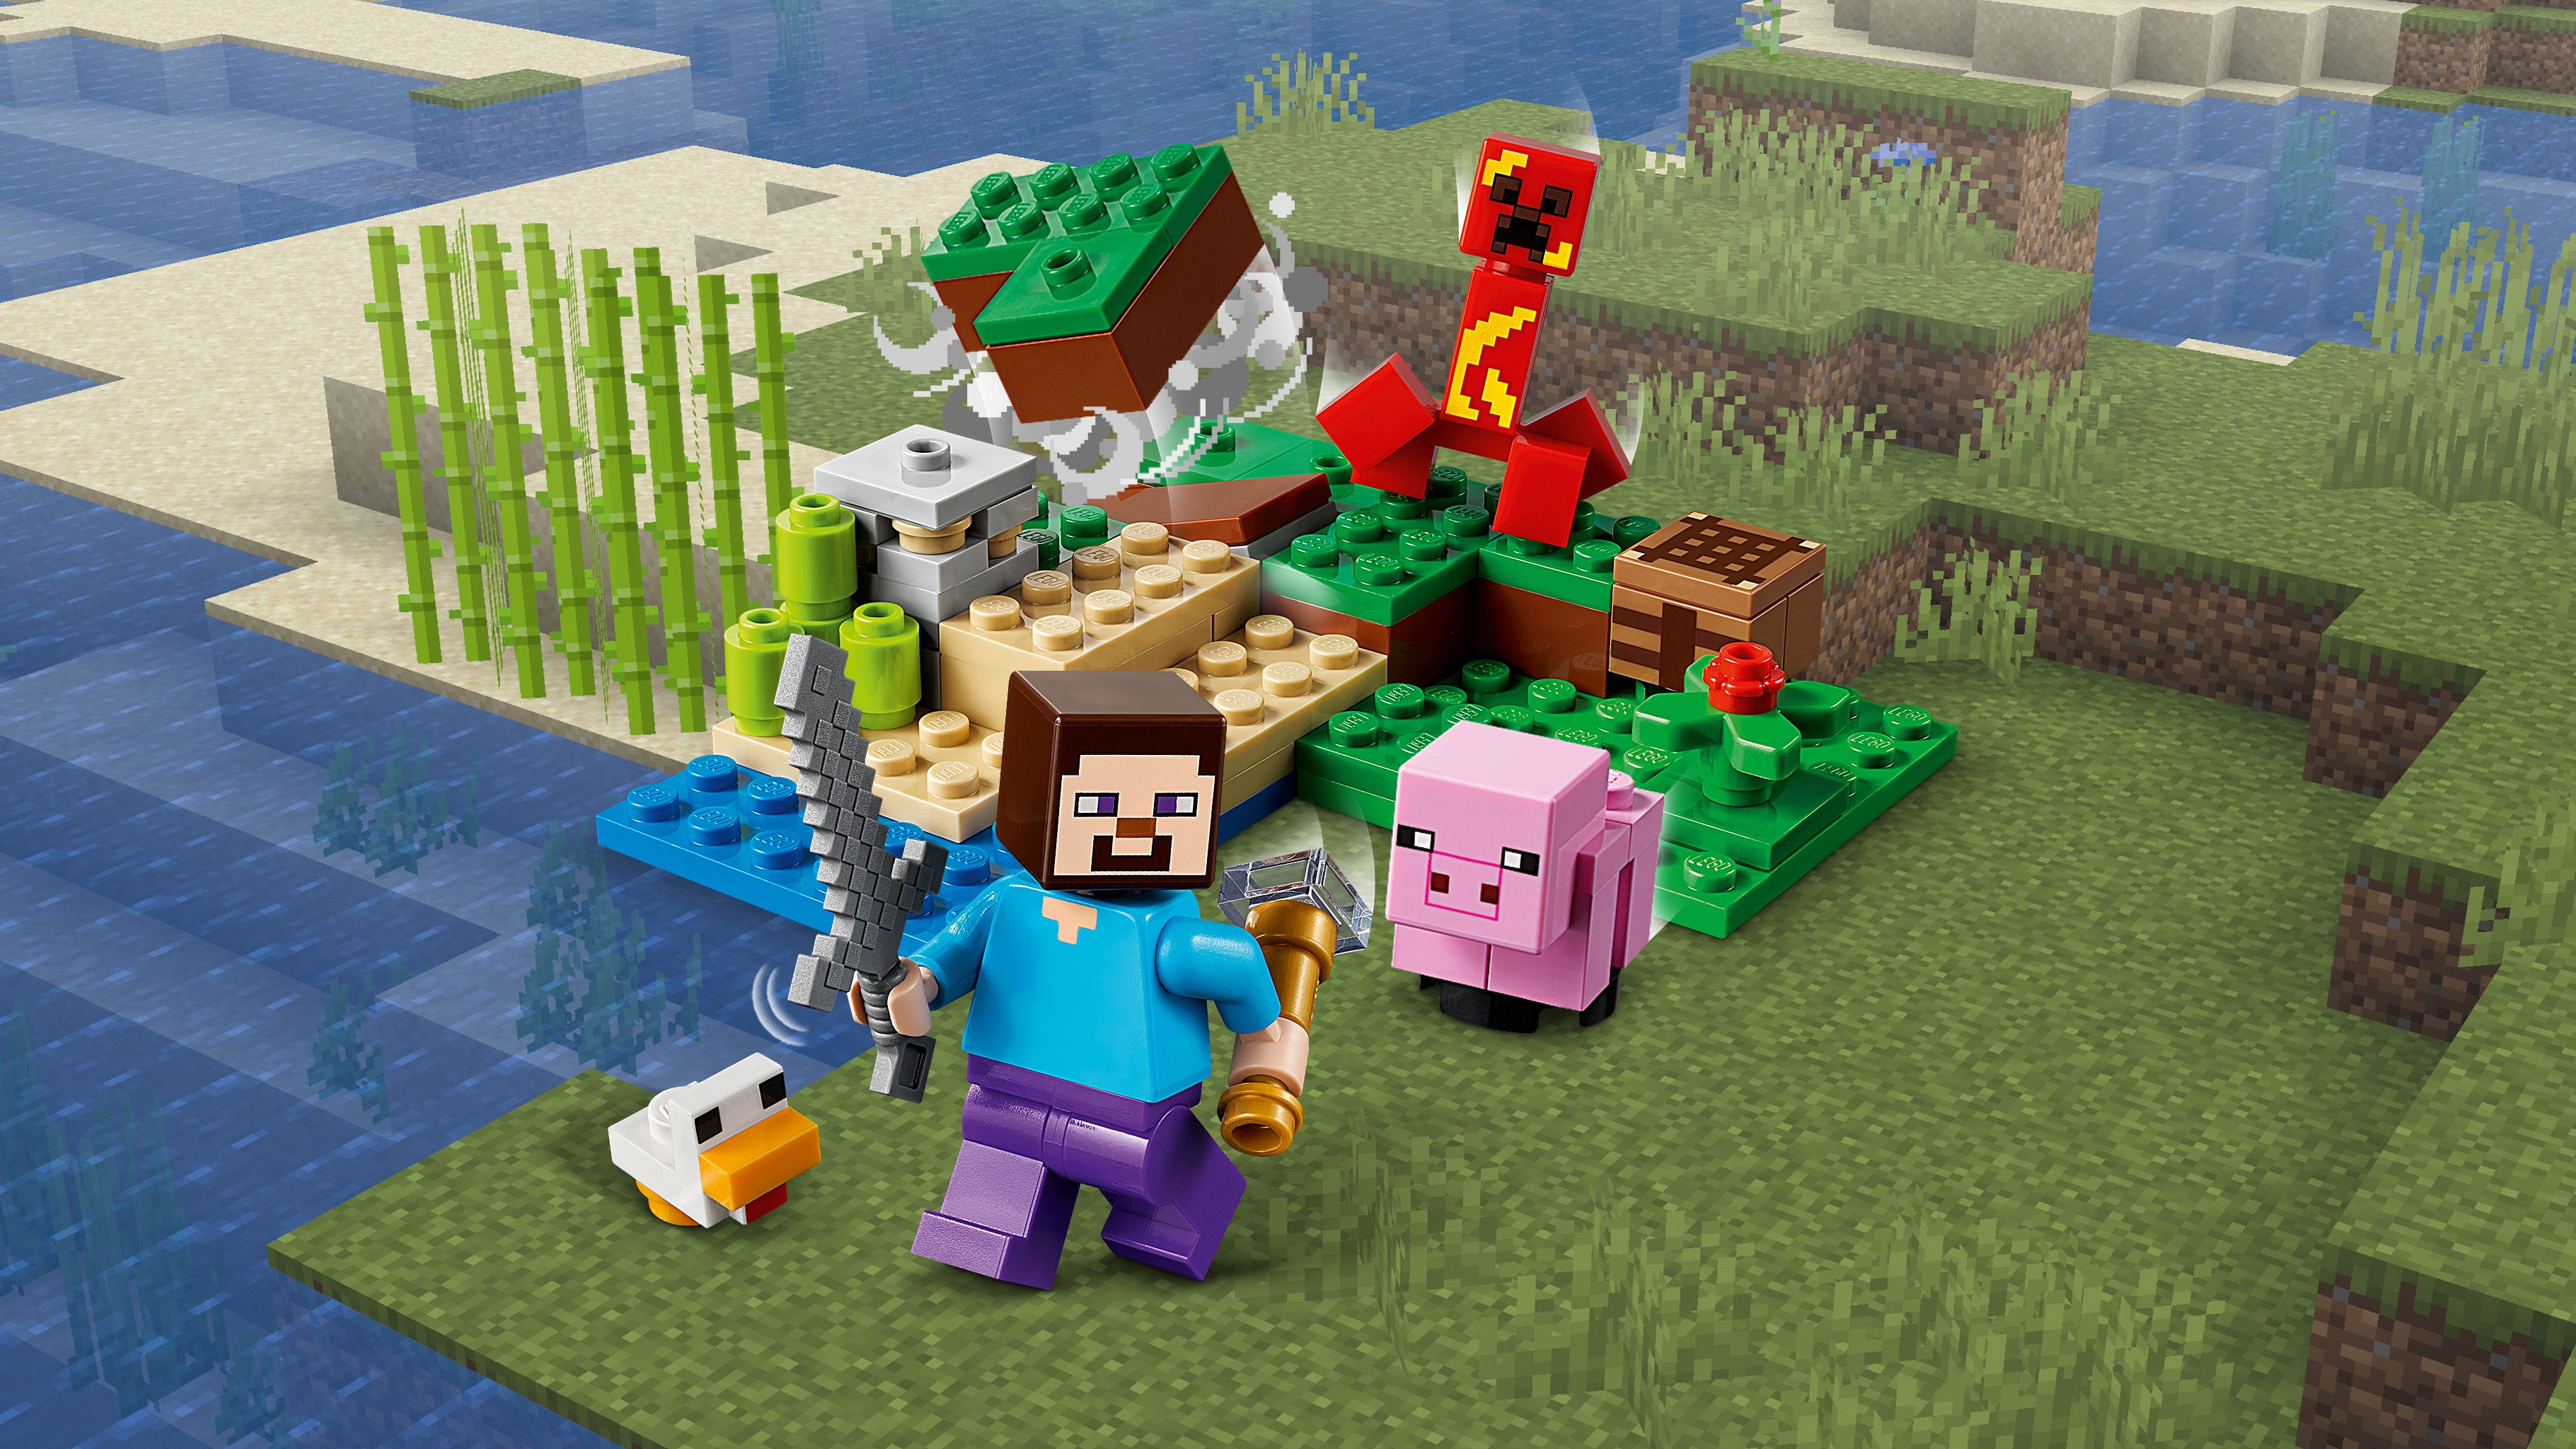 Minecraft Lego sets The Cave and The Farm revealed, Minecraft